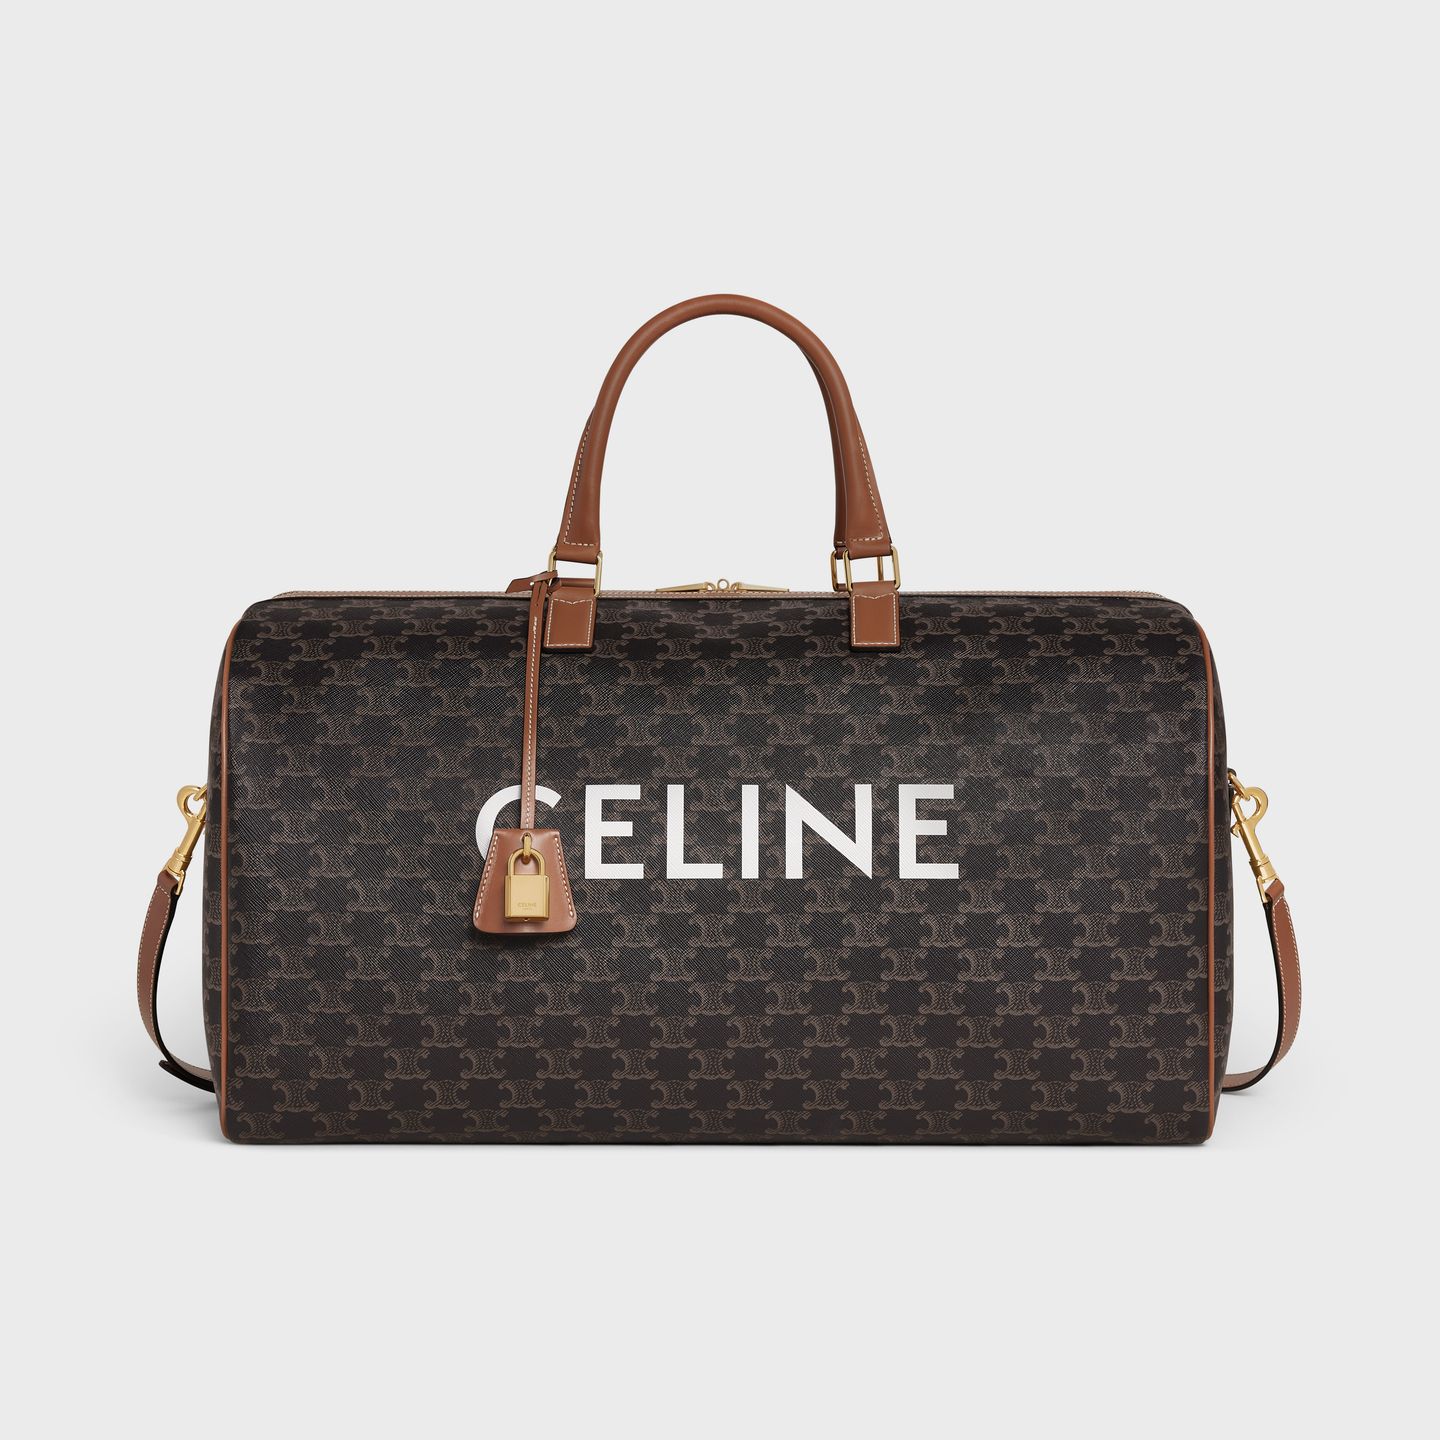 <p><strong>$2600.00</strong></p><p><a href="https://www.celine.com/en-us/celine-shop-women/handbags/triomphe-canvas/large-voyage-bag-in-triomphe-canvas-with-celine-print-191472CYX.04LU.html">Shop Now</a></p><p>This Celine duffel is a timeless travel investment, from the Triomphe logo to the sturdy leather handles and crossbody strap.</p><p><strong>Dimensions: </strong>20" x 11" x 9"</p><p><strong>Materials: </strong>Canvas and leather with textile lining</p>